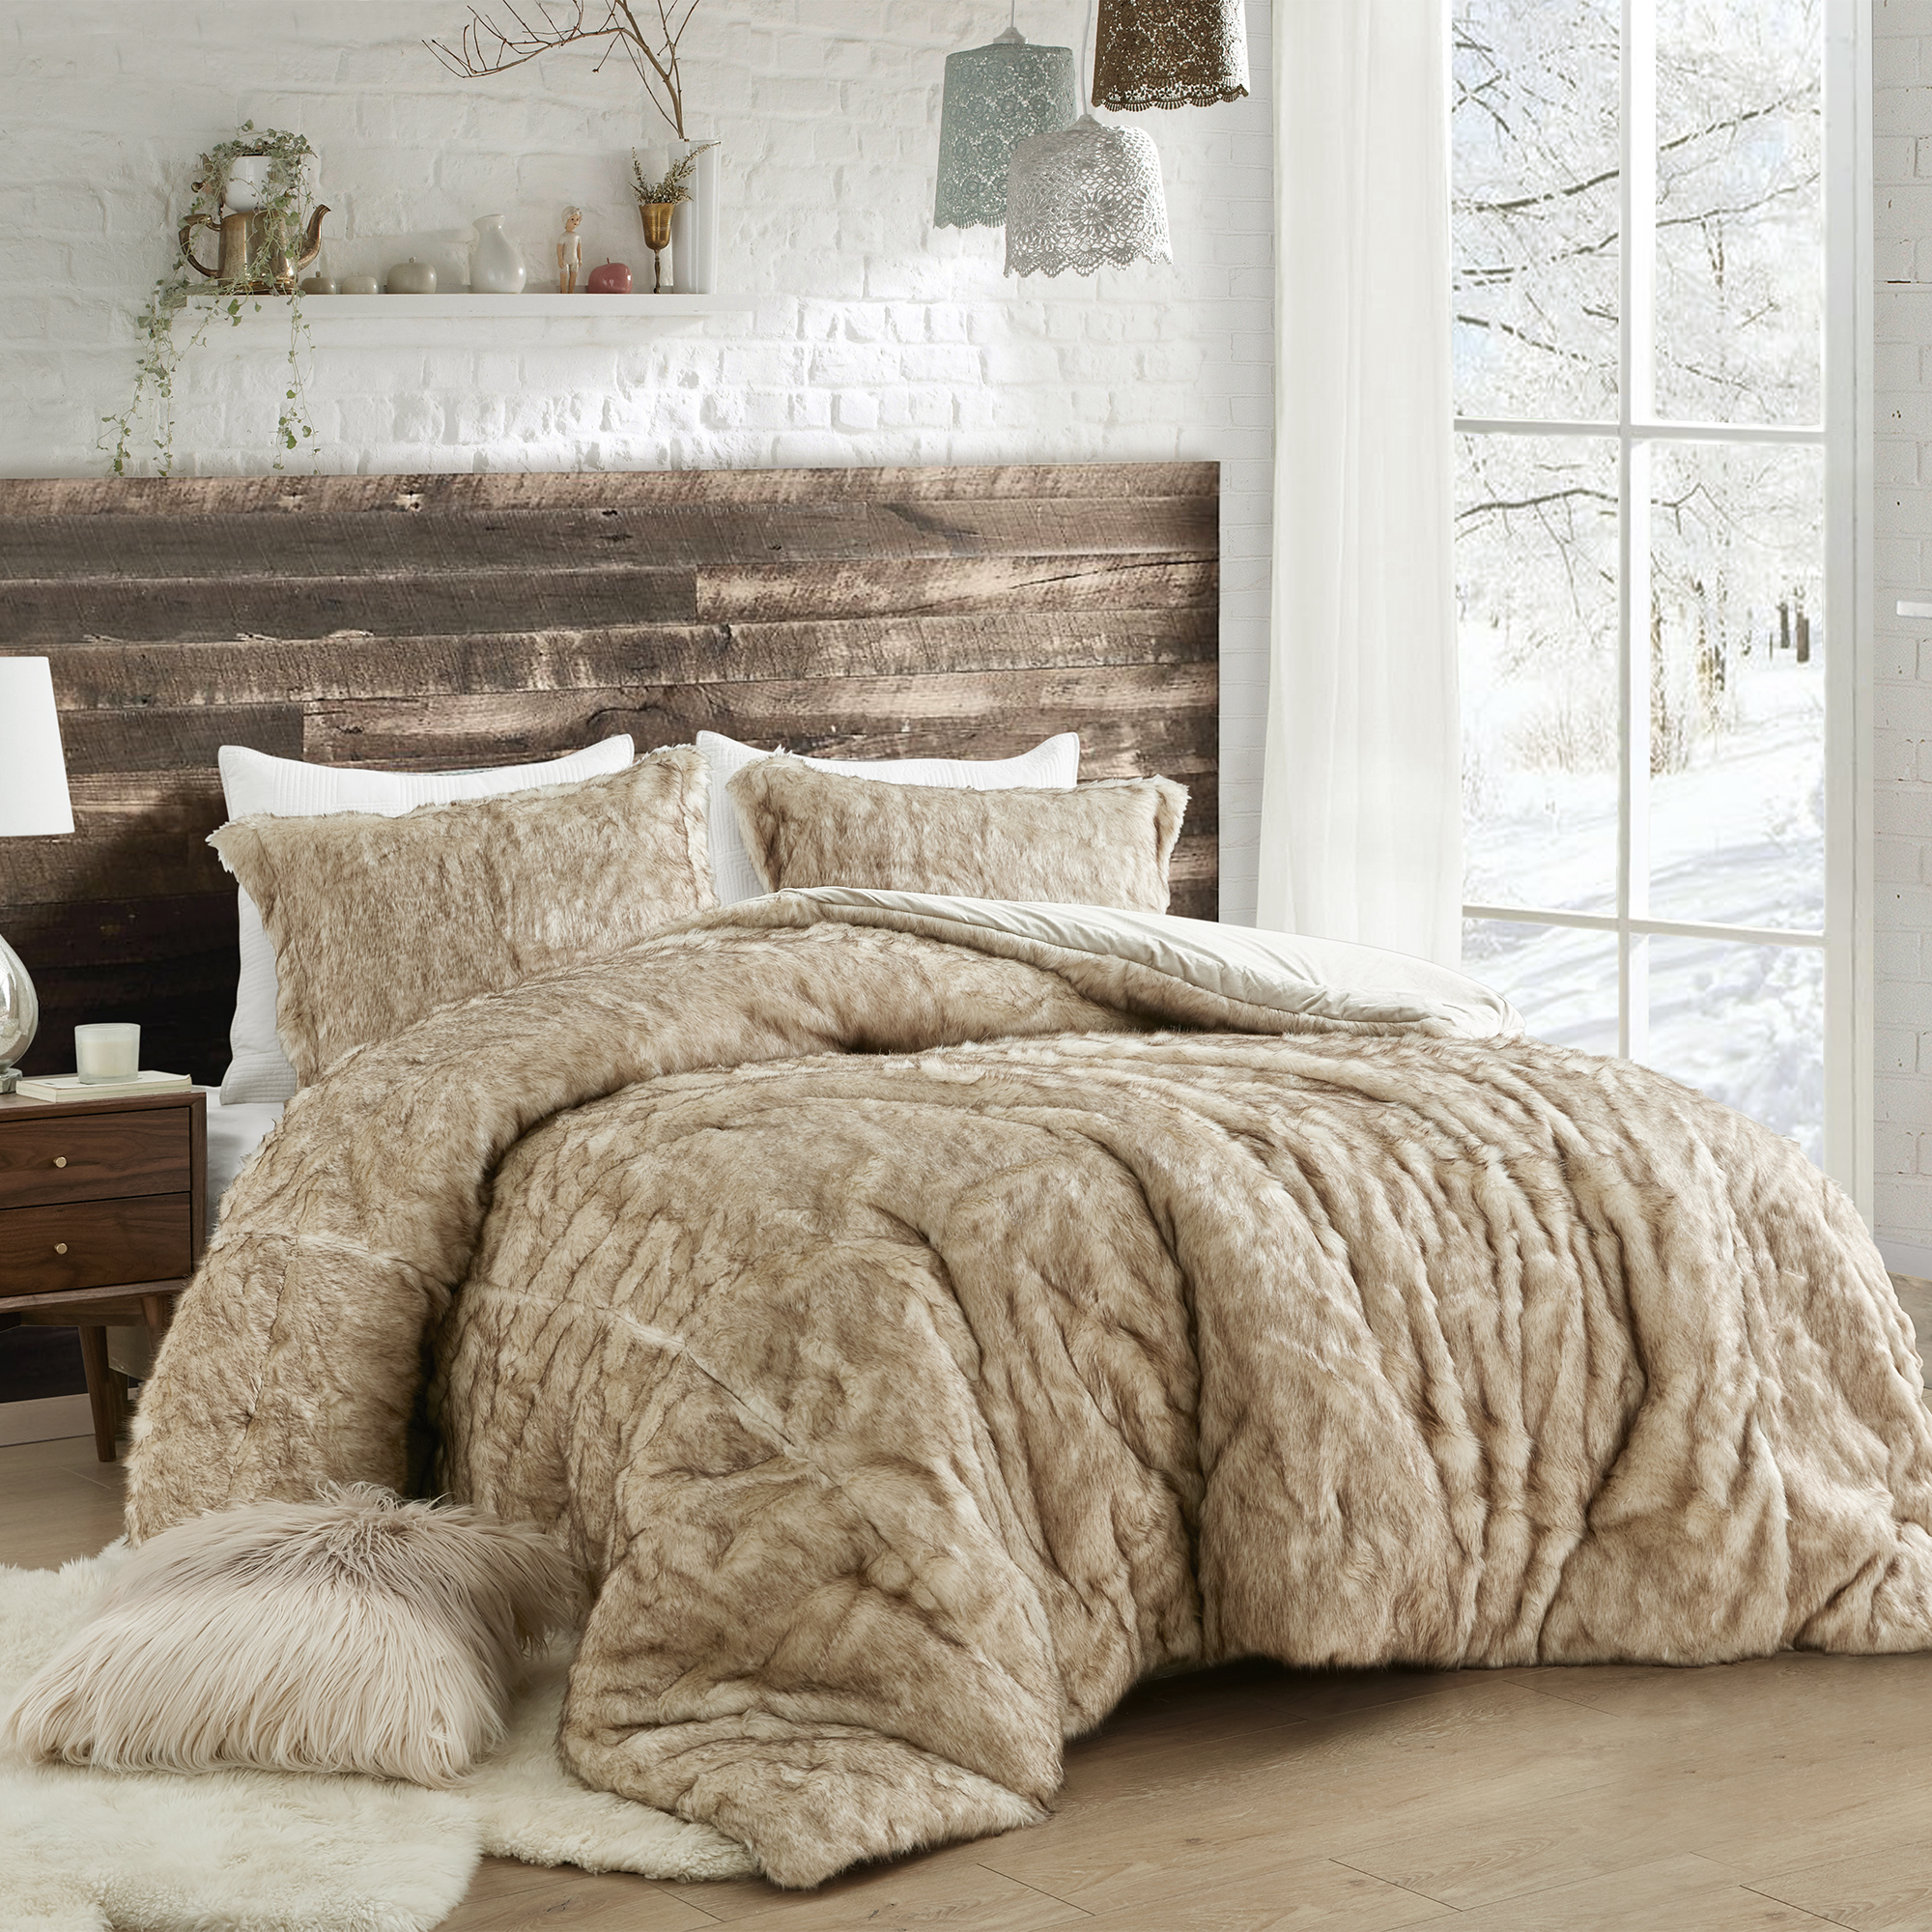 Coma Inducer® Oversized Twin Comforter - Arctic Bear - Tundra Brown